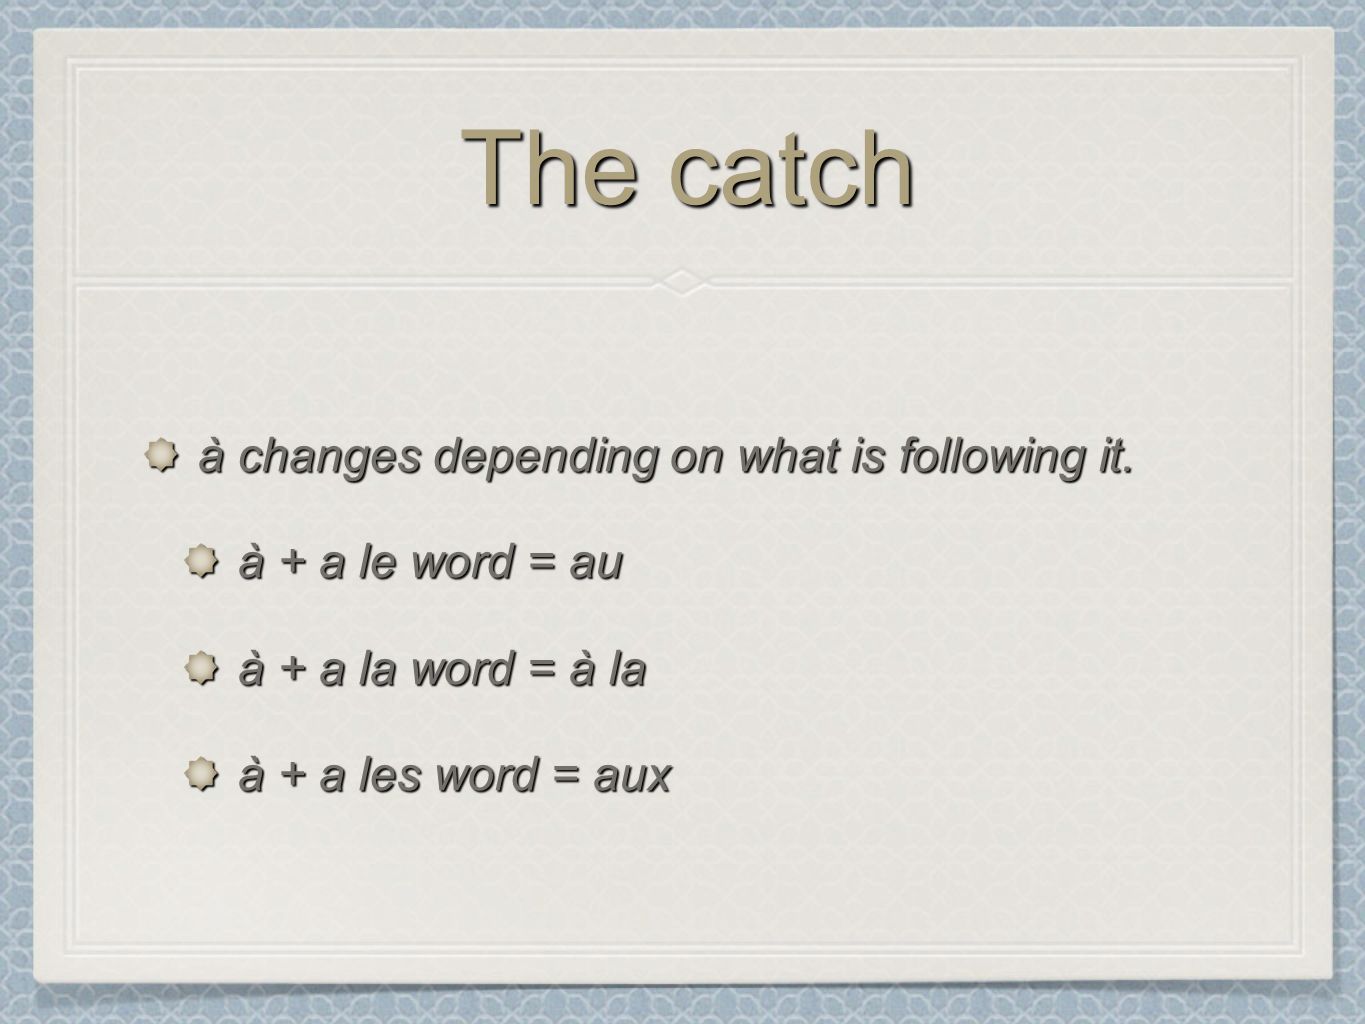 The catch à changes depending on what is following it.